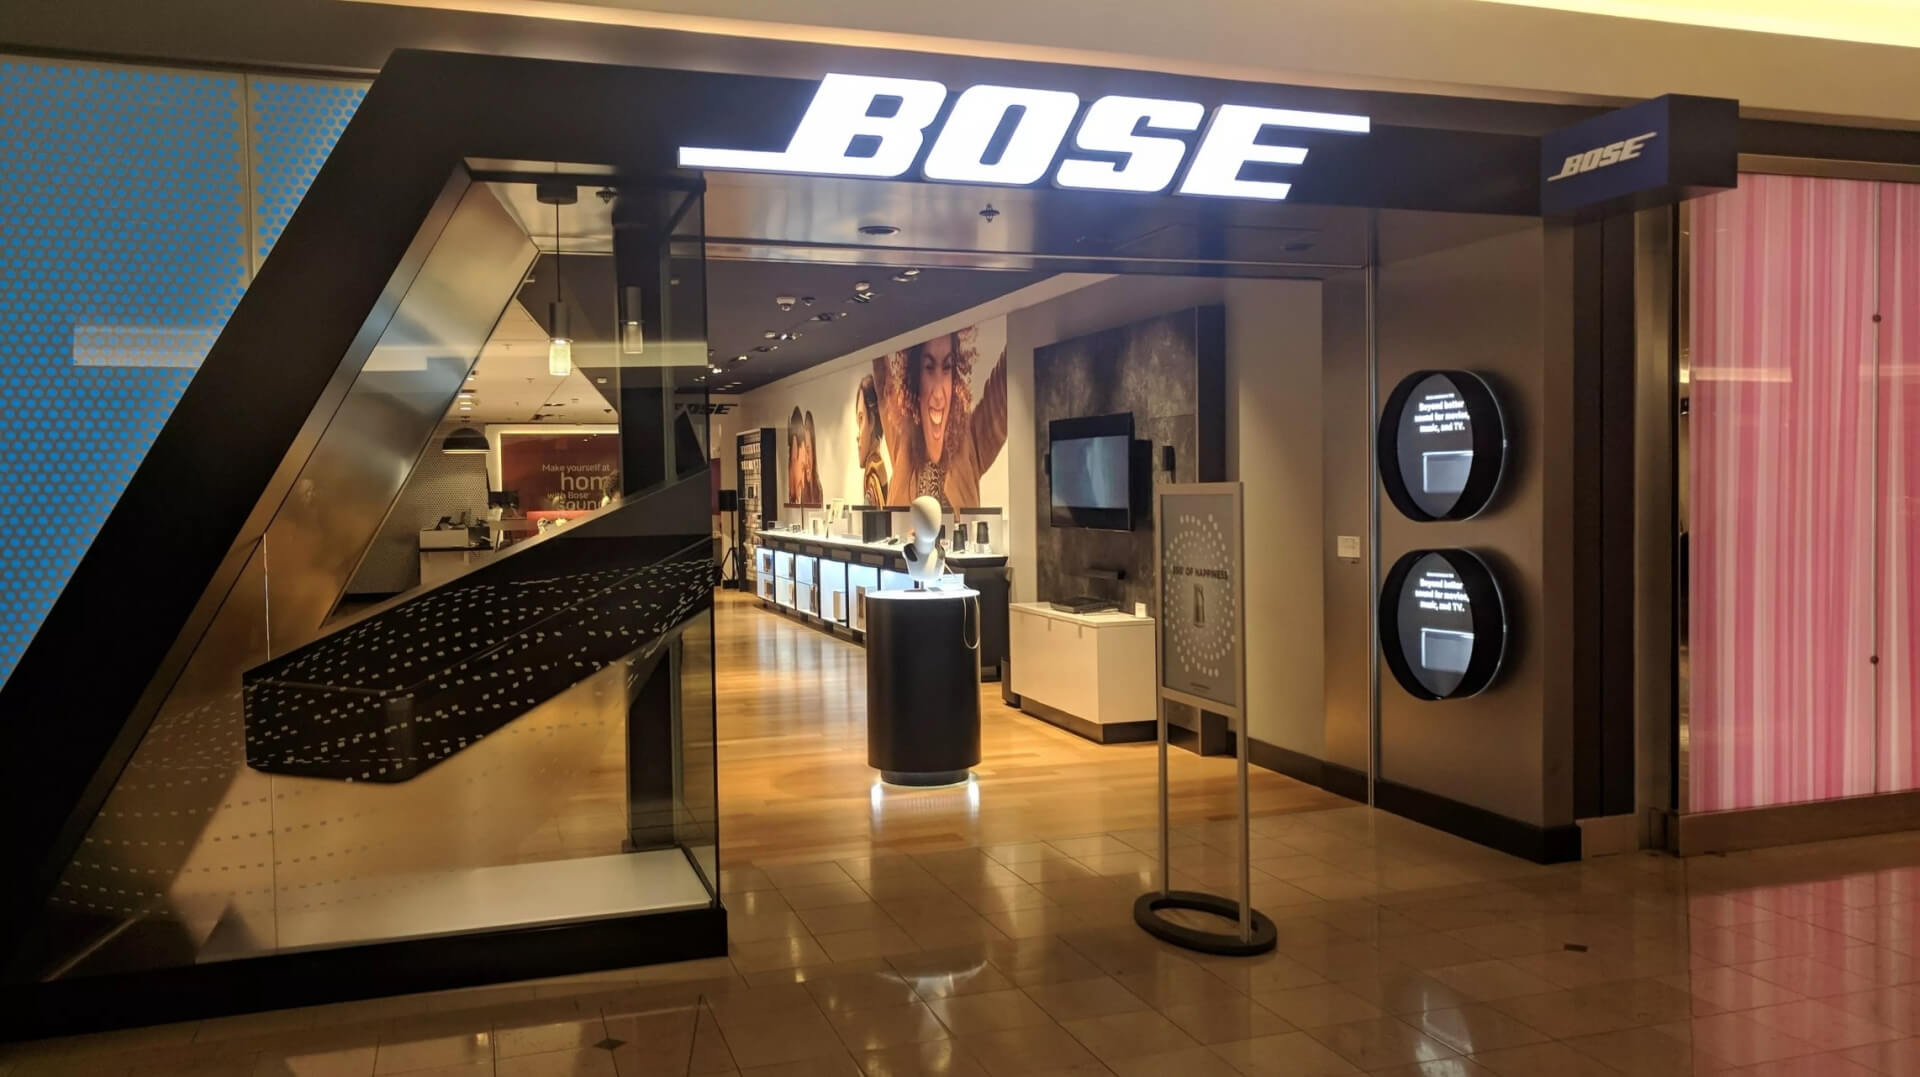 Bose is shutting down all of its 119 retail stores in North America, Europe, Japan, and Australia